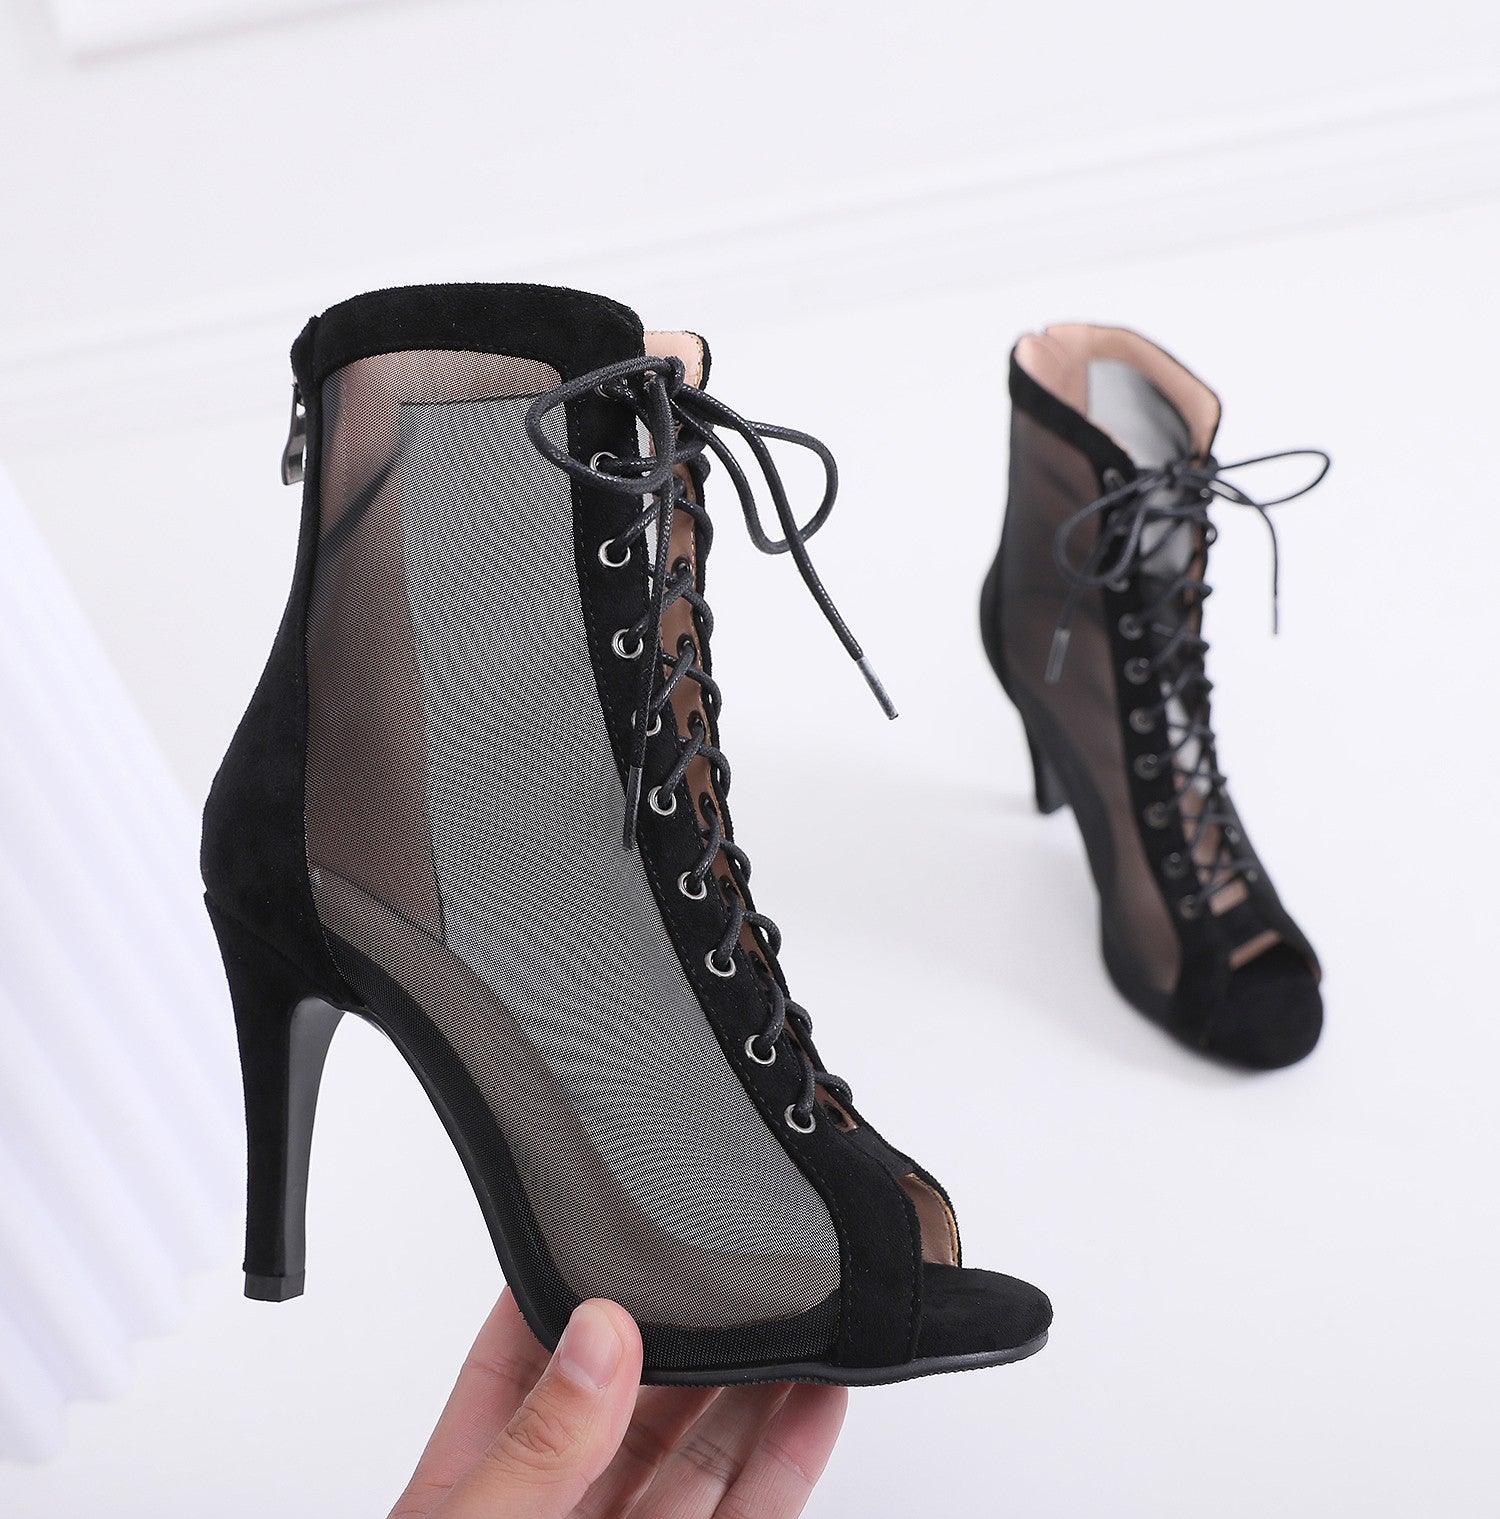 Ladies' Mesh Stiletto Lace Up Jazz Dance High Heel Hollow Out Ankle Boots